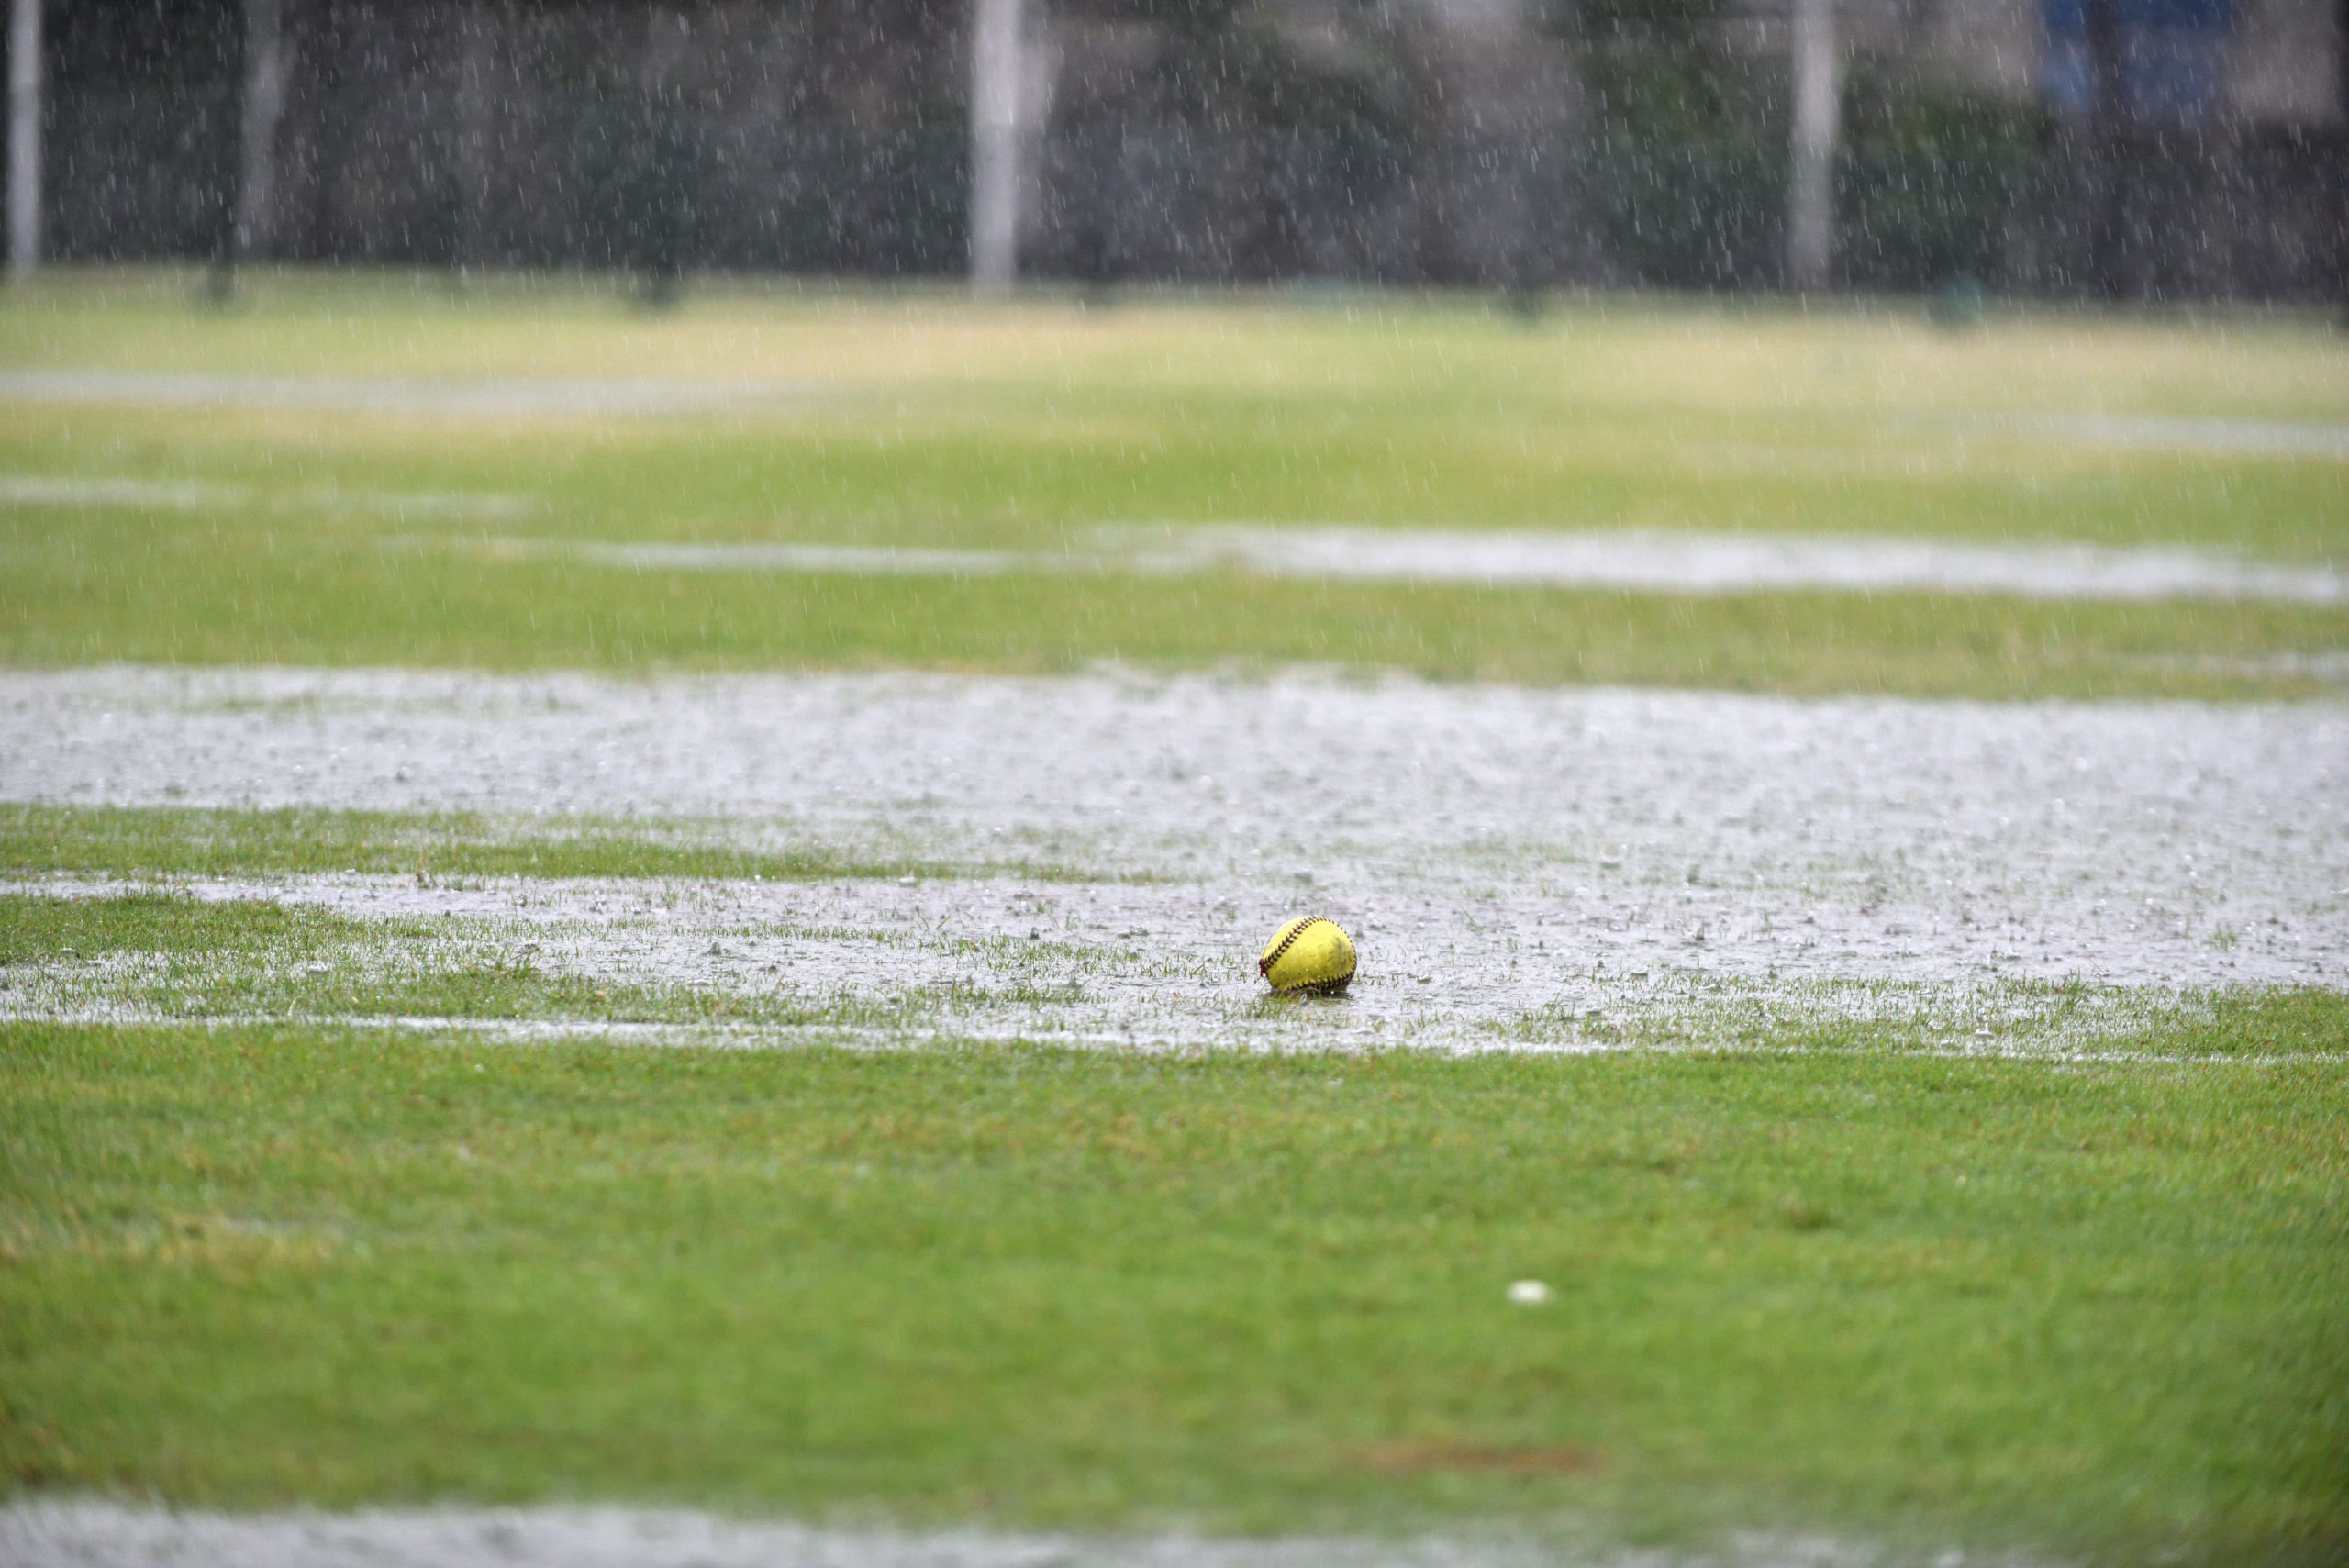 A fresh green softball left on a raining field waiting for a league match to begin while the field is full with water and no player.